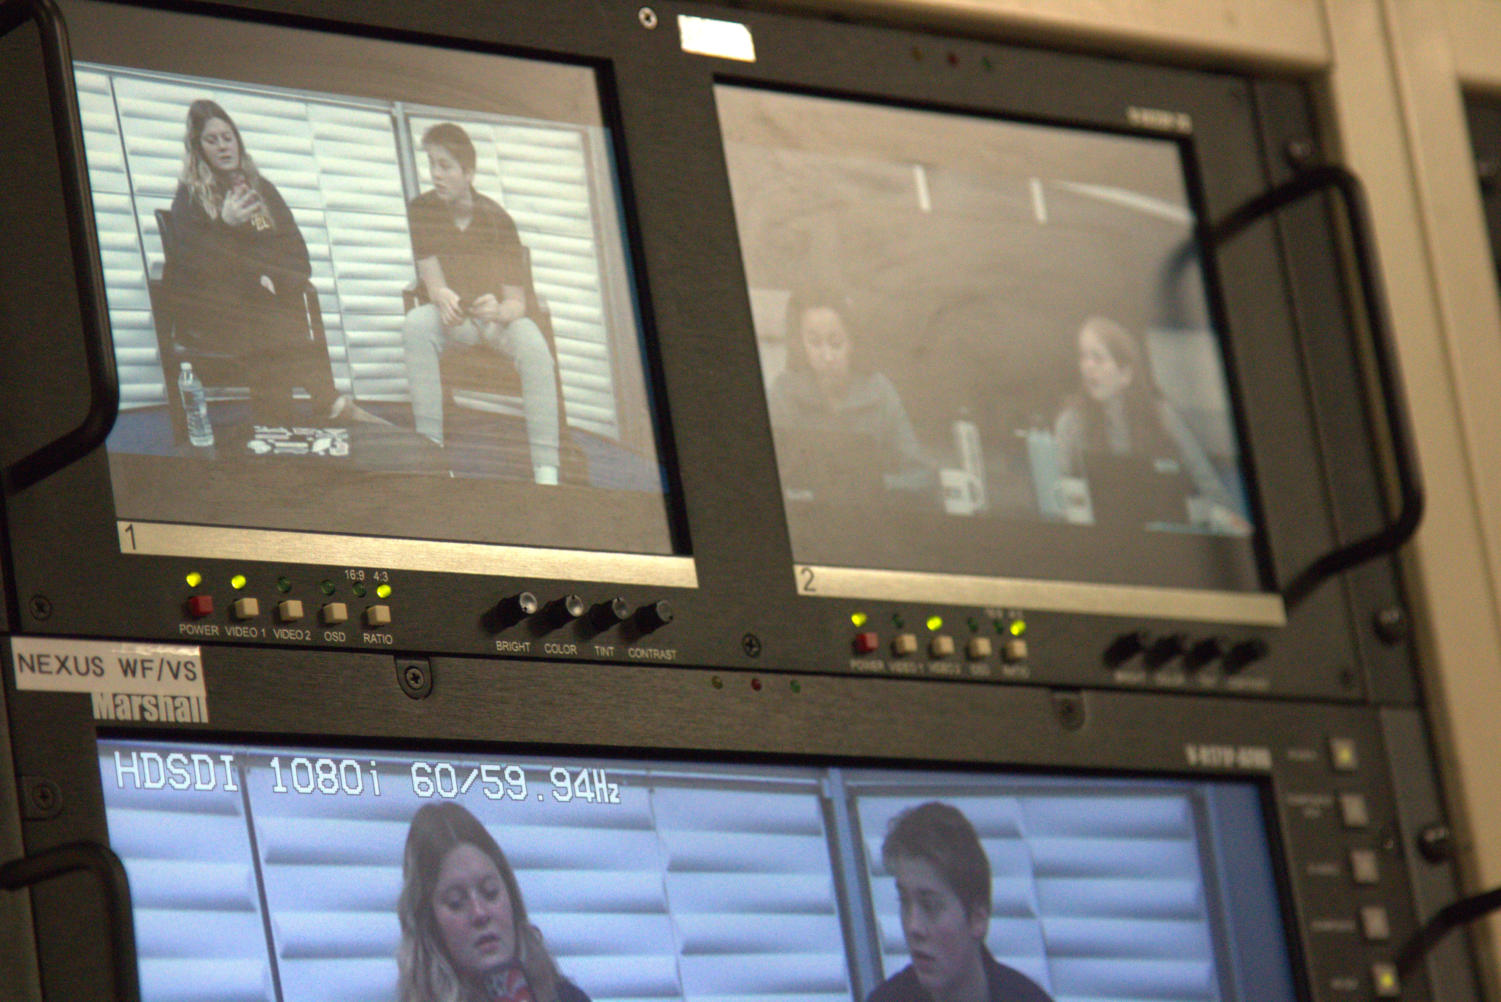 Monitors in the CHTV control room